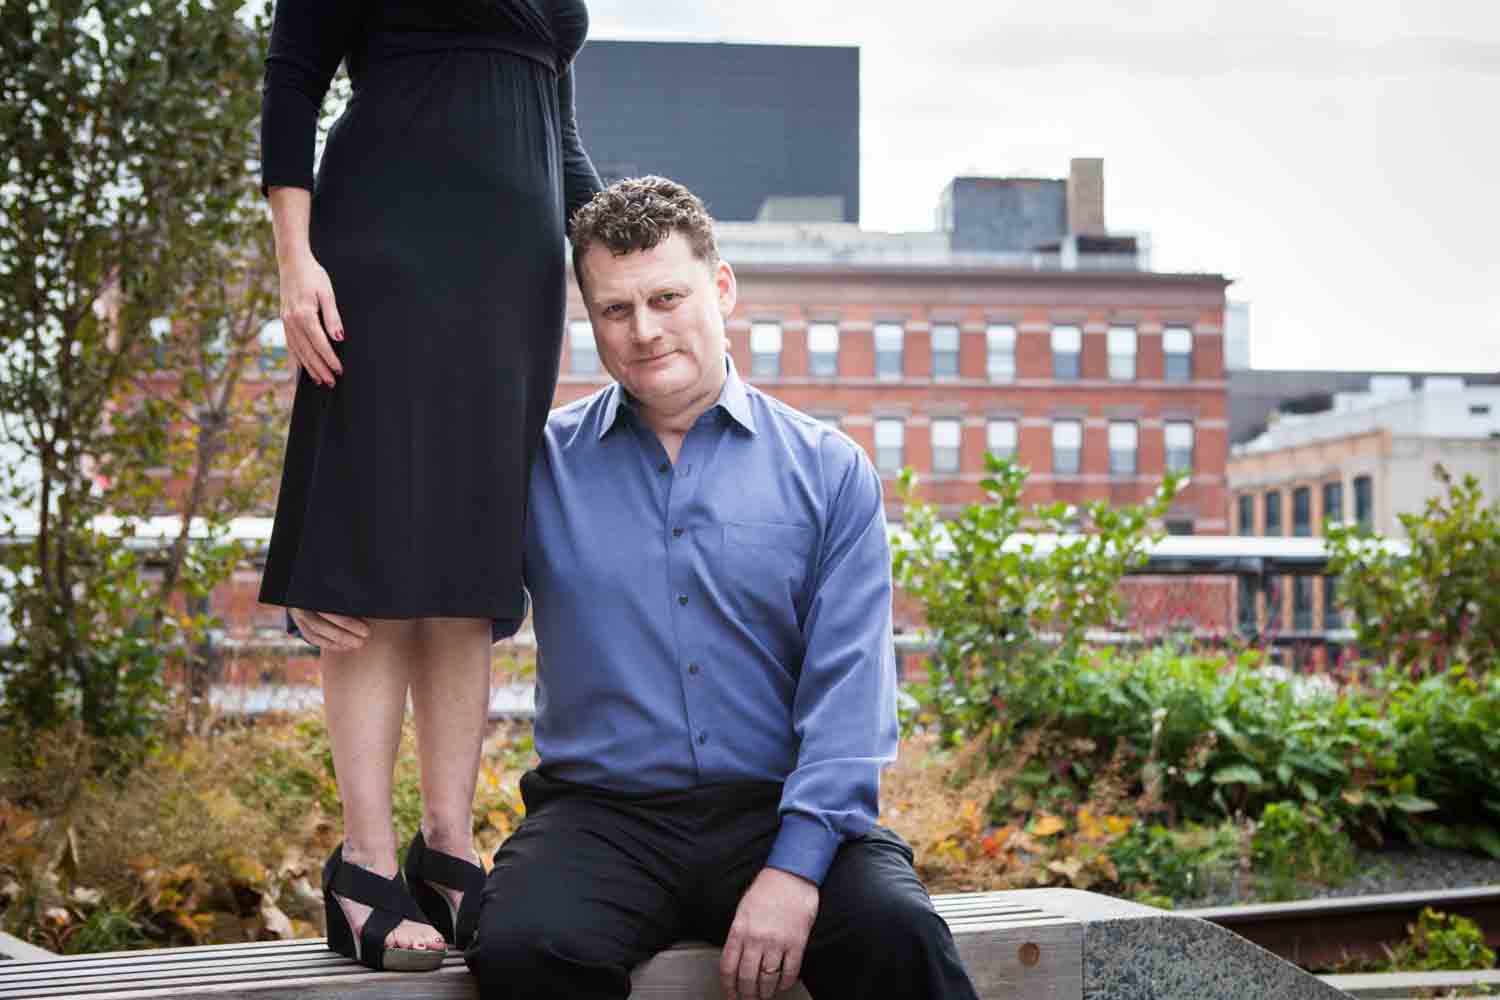 Man sitting on bench hugging legs of woman standing above him